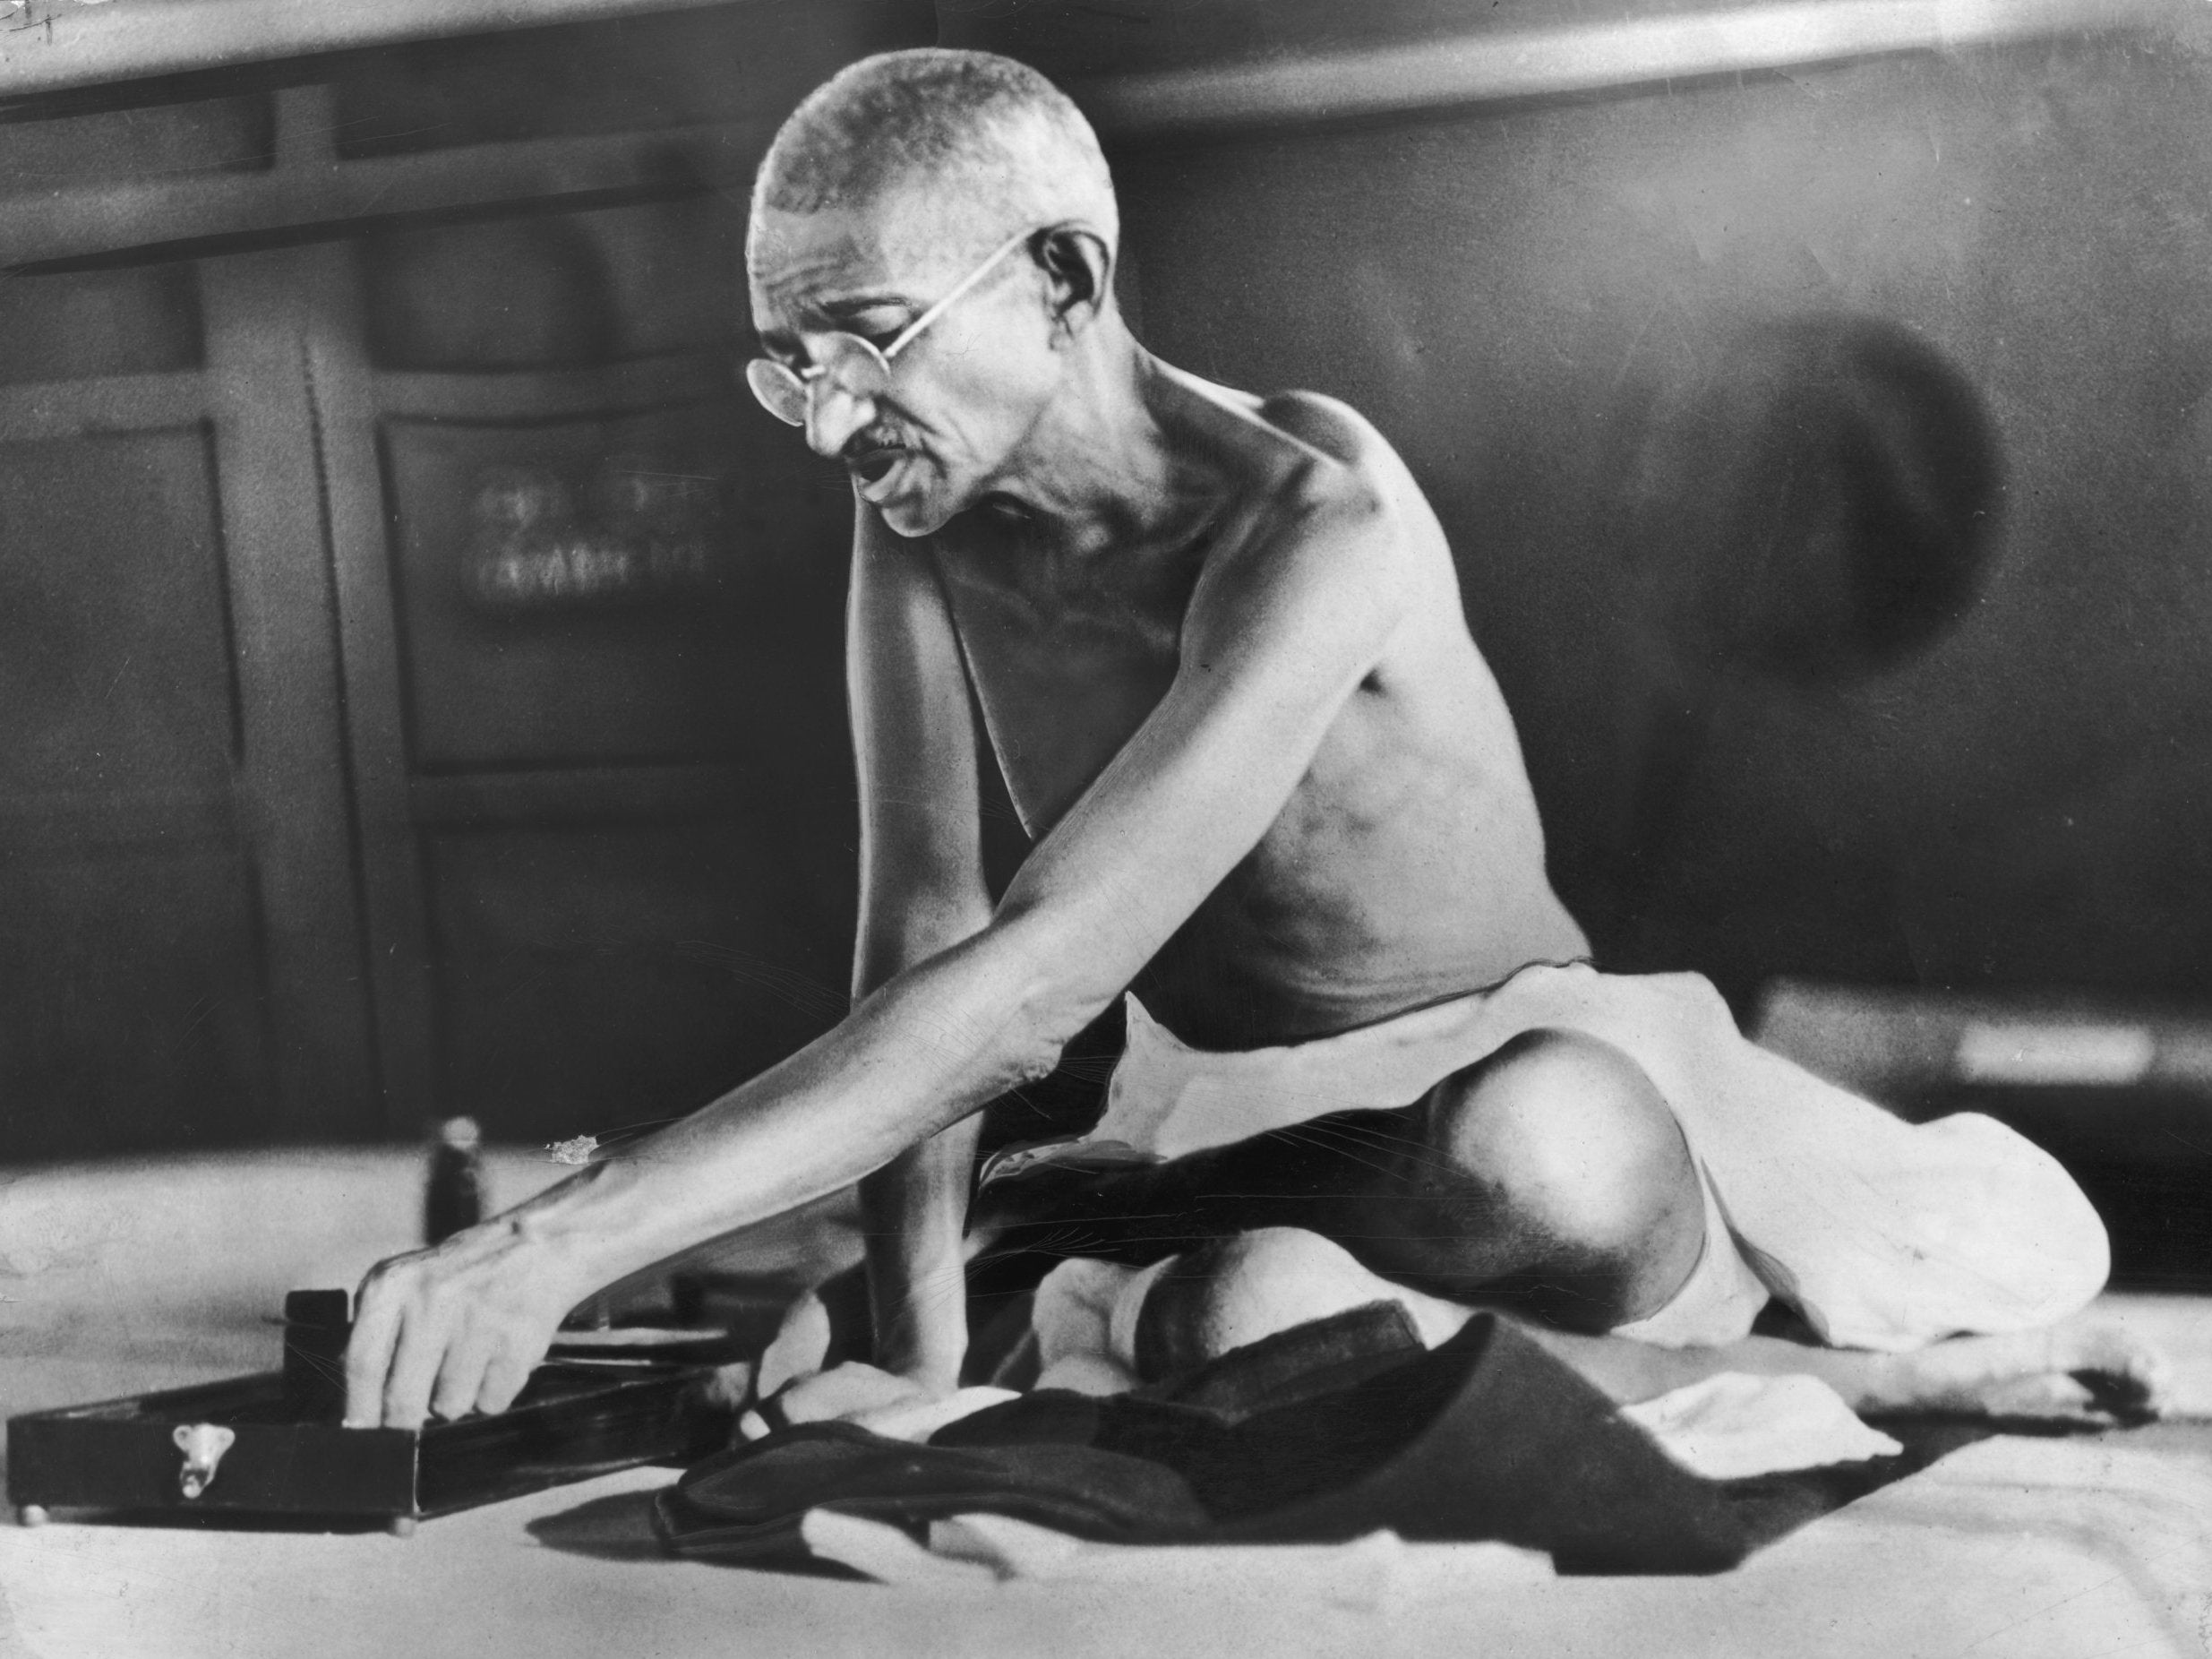 Gandhi, circa 1935: ‘He is like Churchill, Napoleon, Mao, Lincoln, any great figure – his legacy will be debated endlessly’